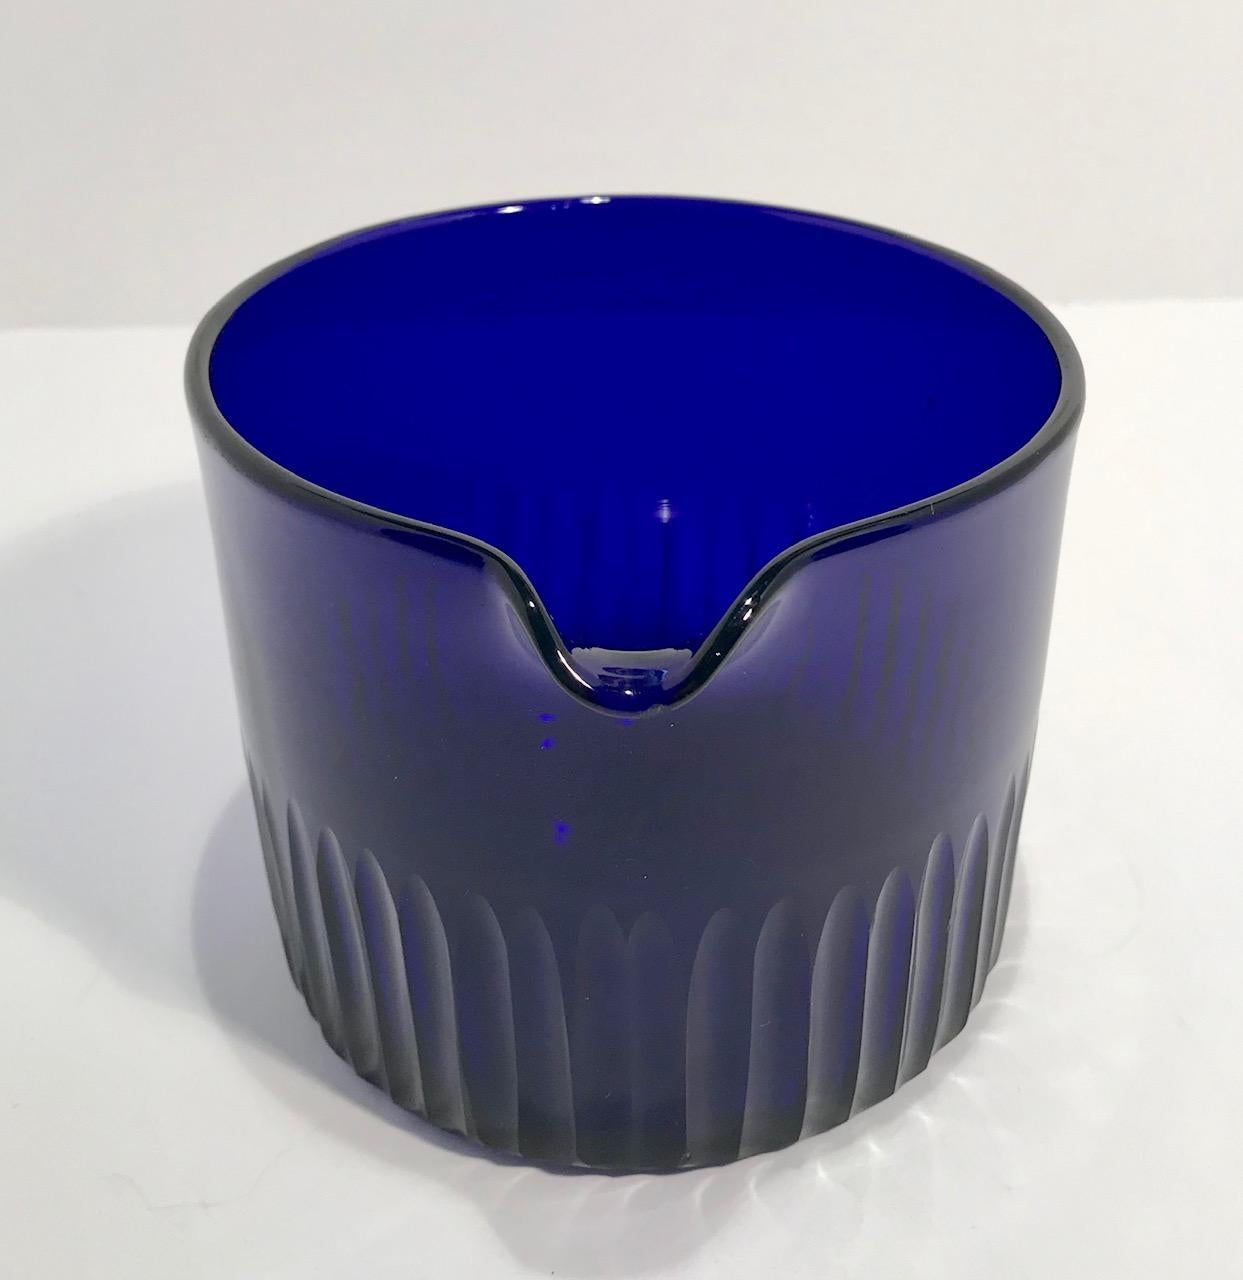 Handblown Bristol (cobalt) blue wine rinse with a single lip. Fluting around the base and a polished pontil on the underside. This hard to find form has the most brilliant deep blue almost purple coloring.

(This item is eligible for a gift box)